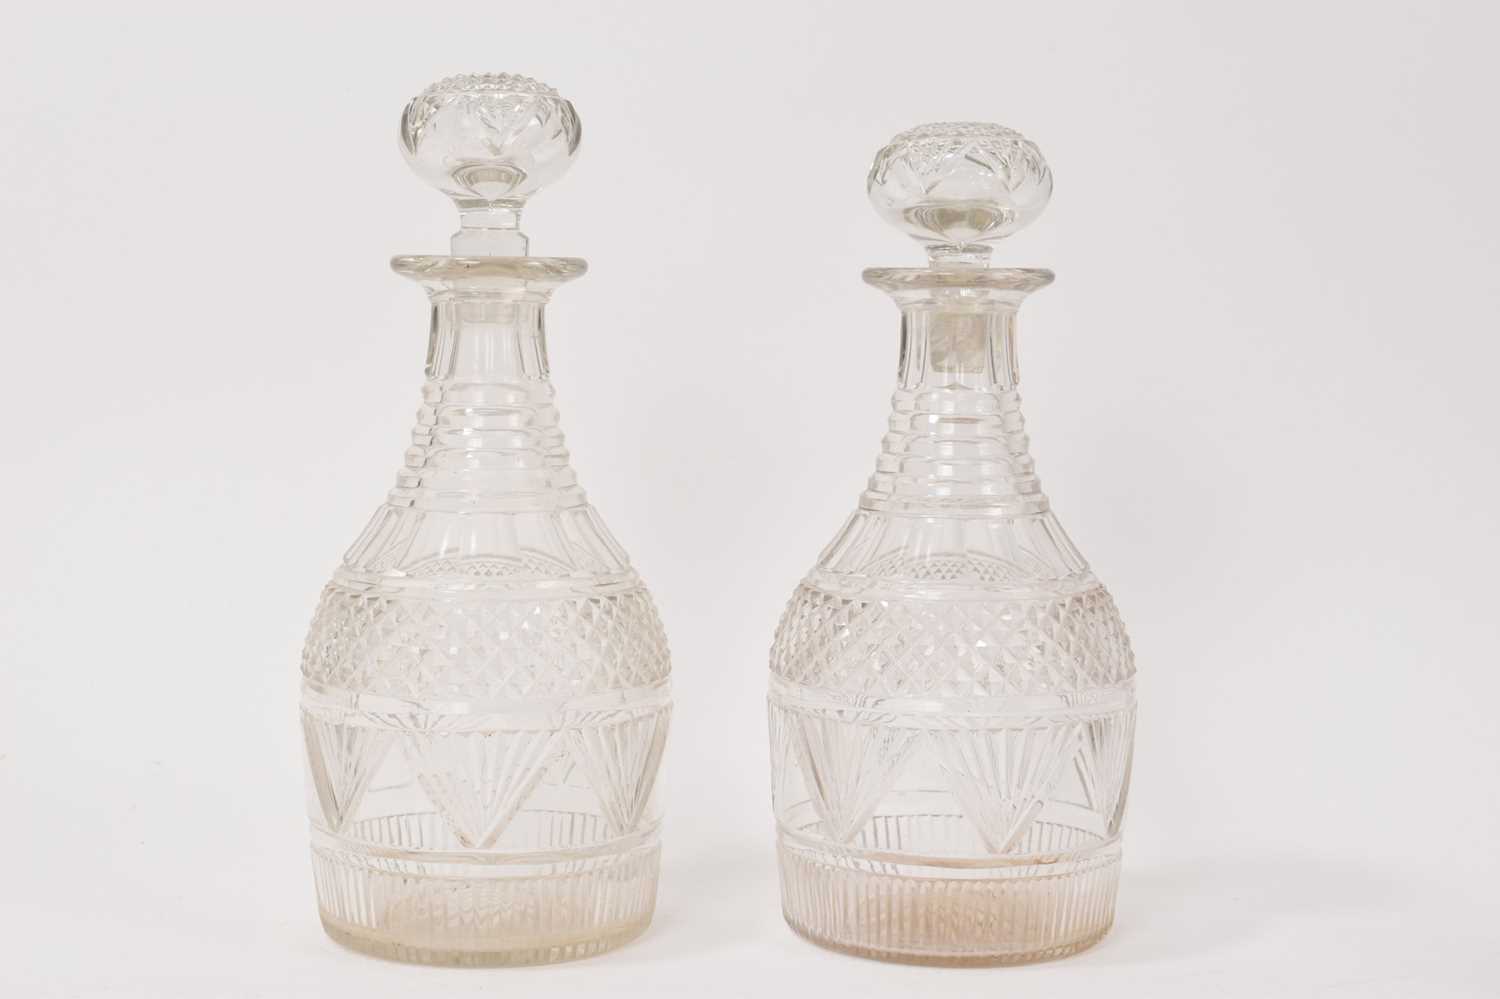 Lot 55 - Pair of hobnail cut decanters and stoppers